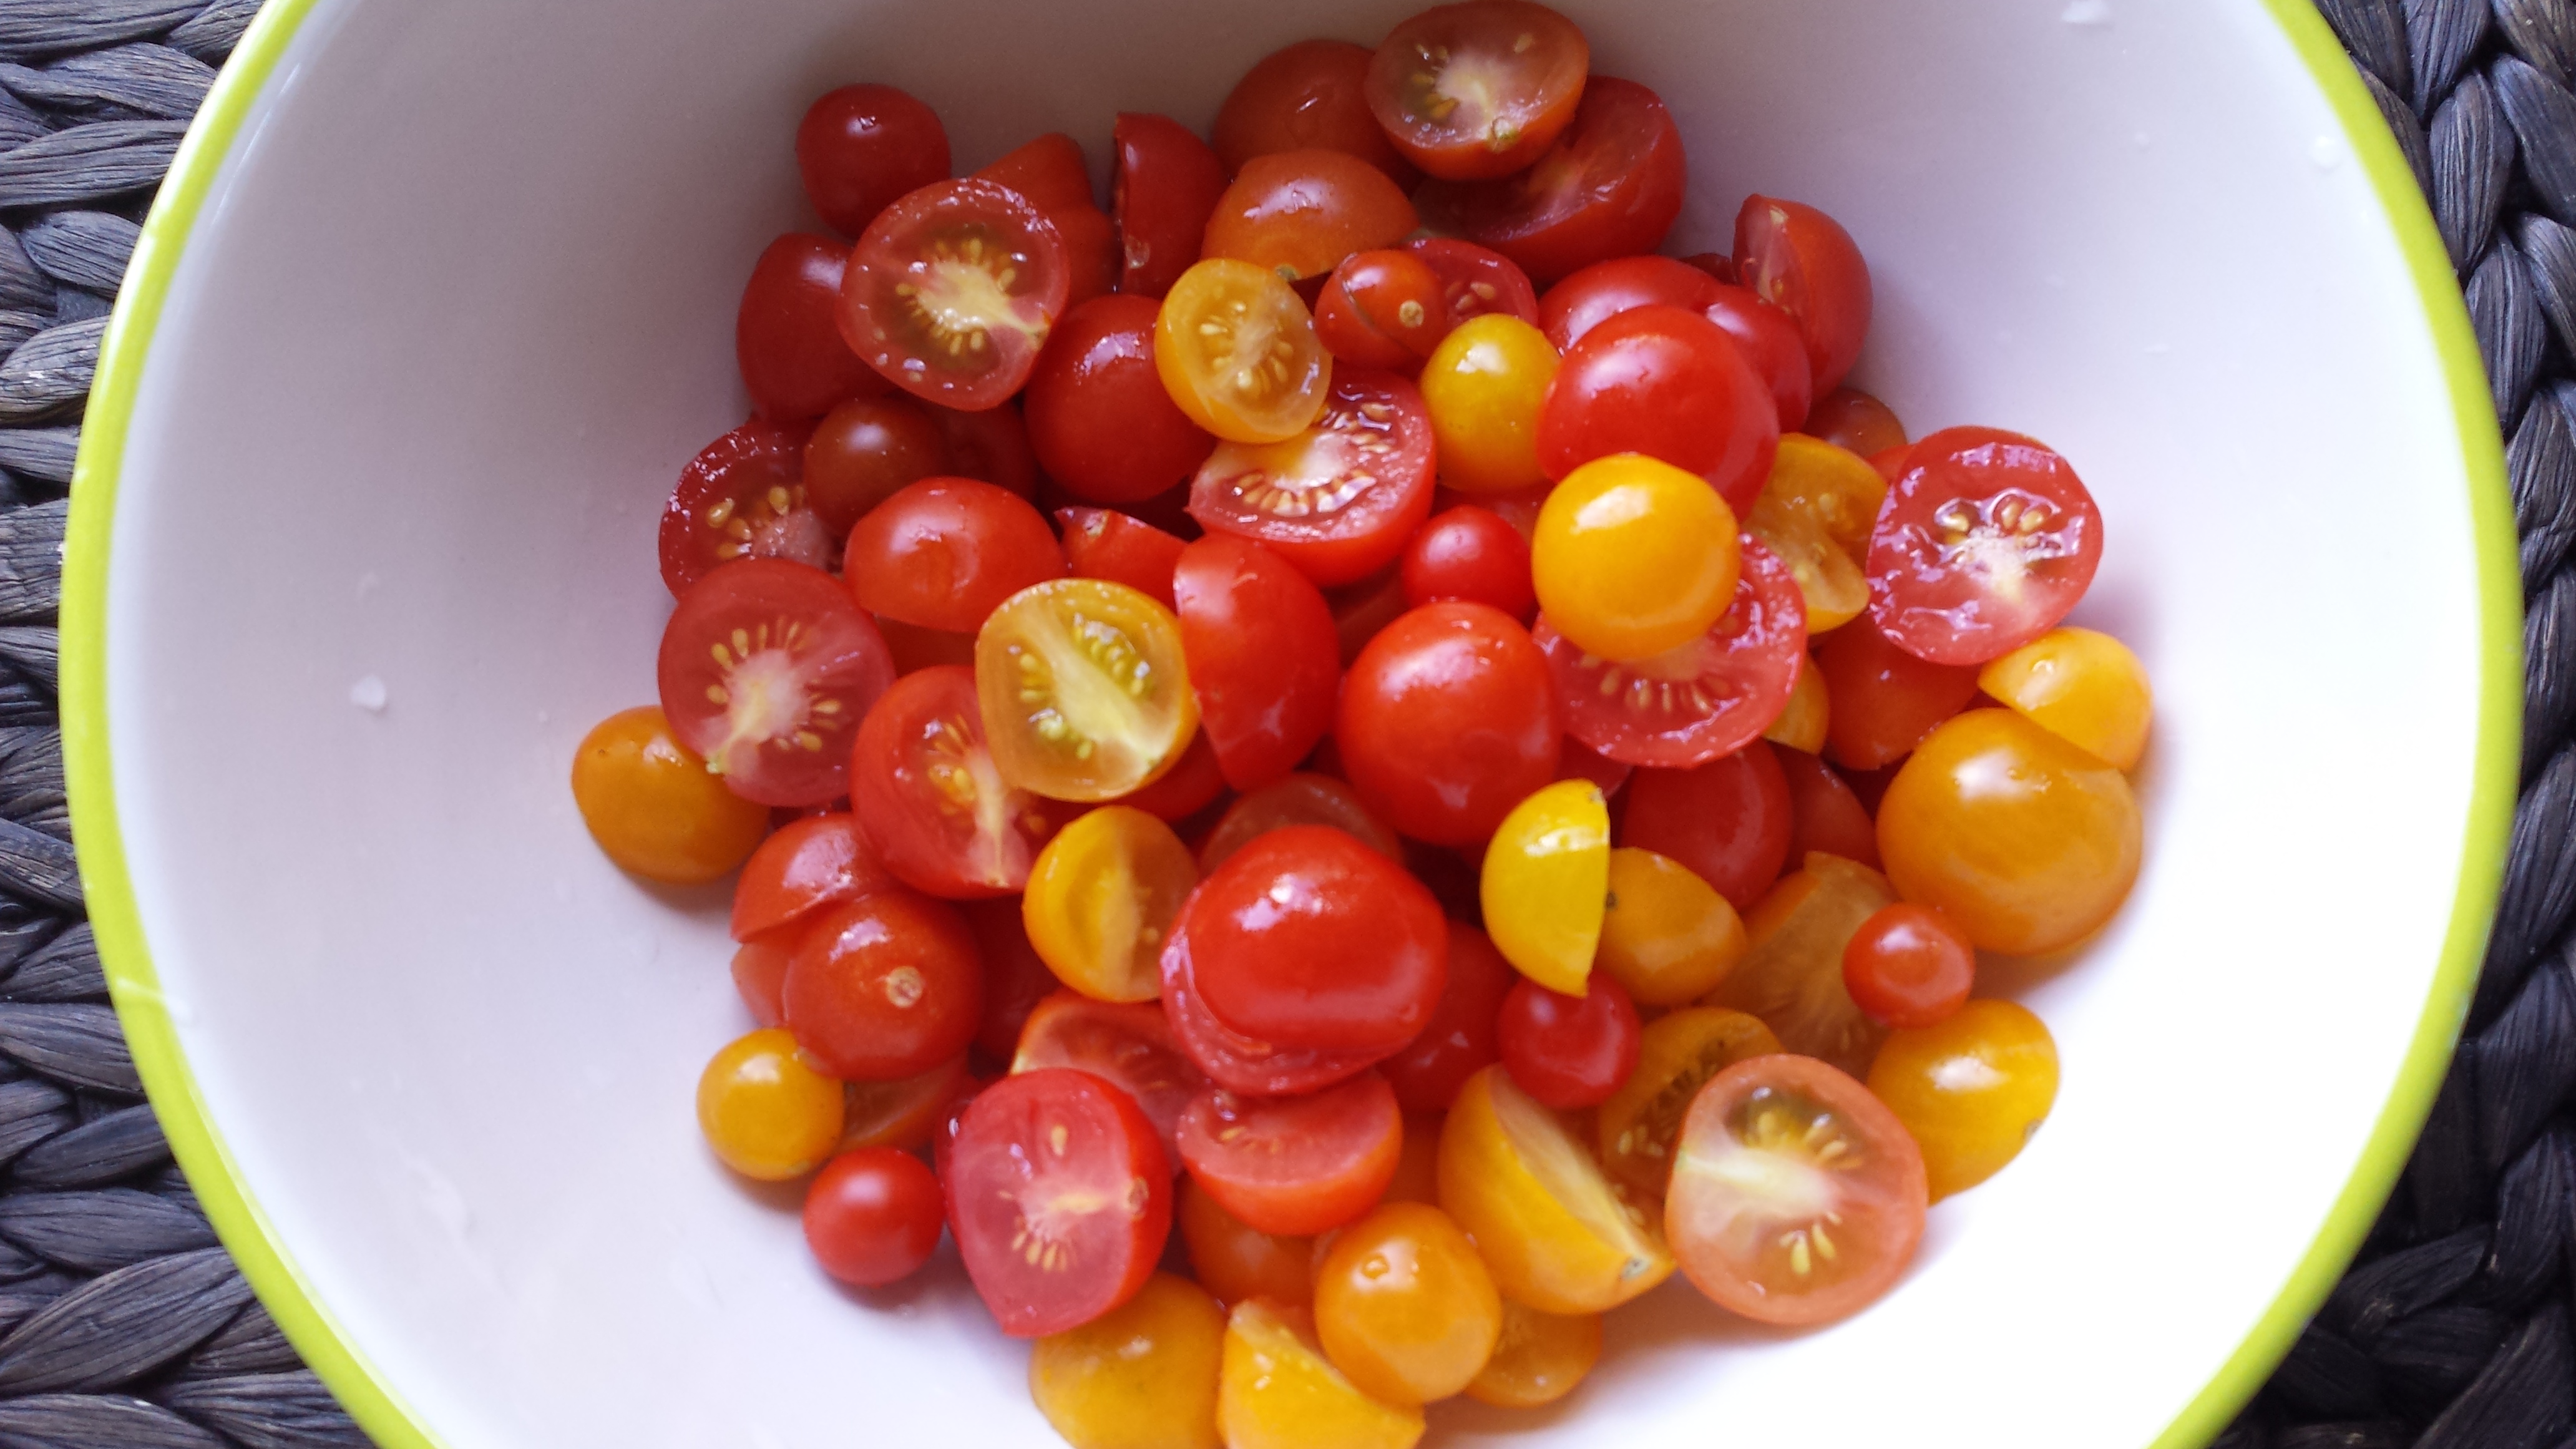 Red yellow cherry tomatoes cut in half